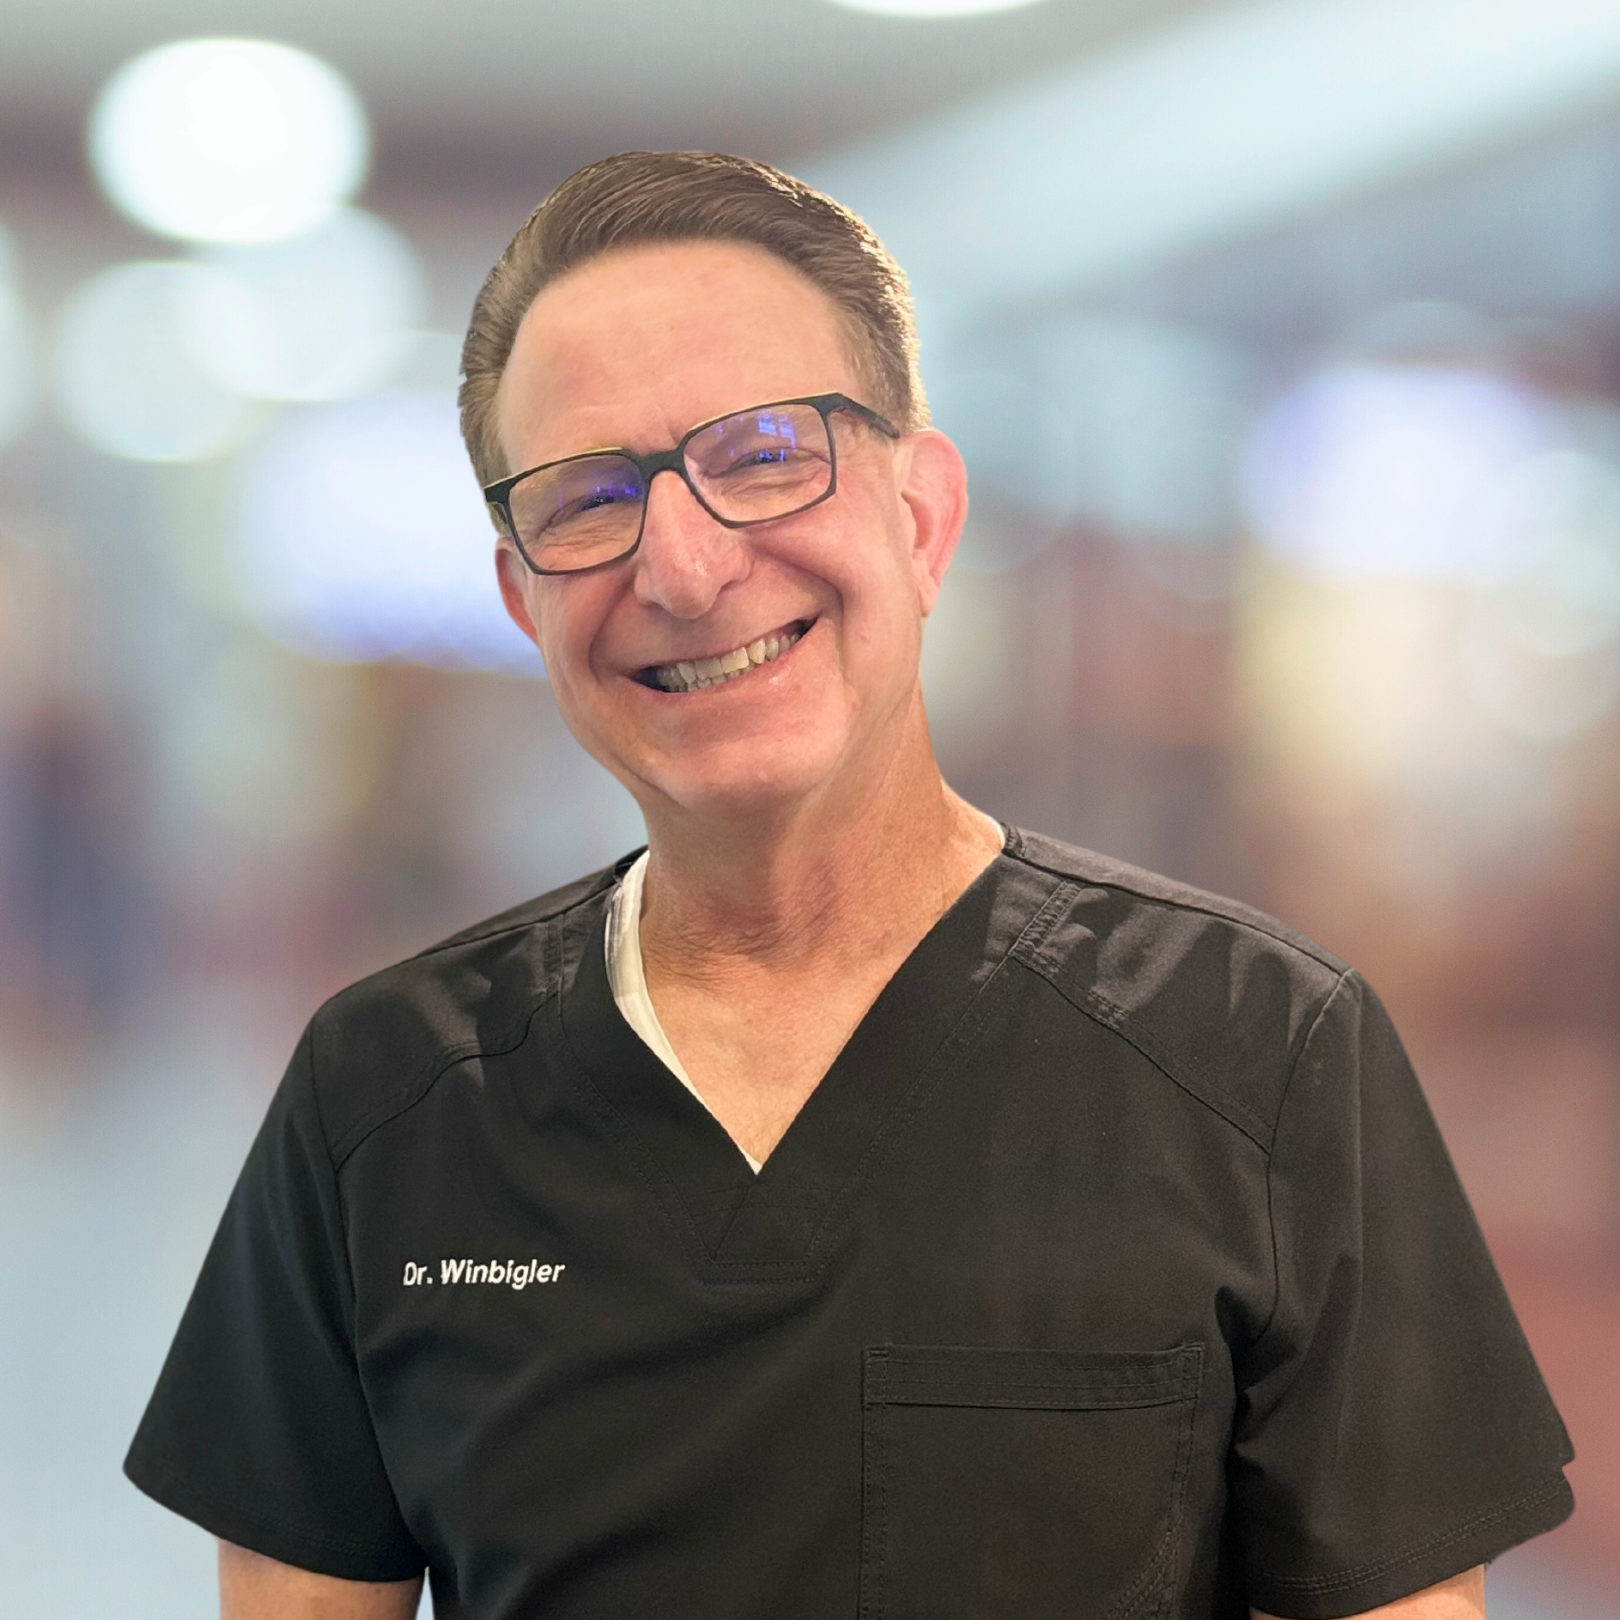 A man wearing scrubs and glasses is smiling for the camera